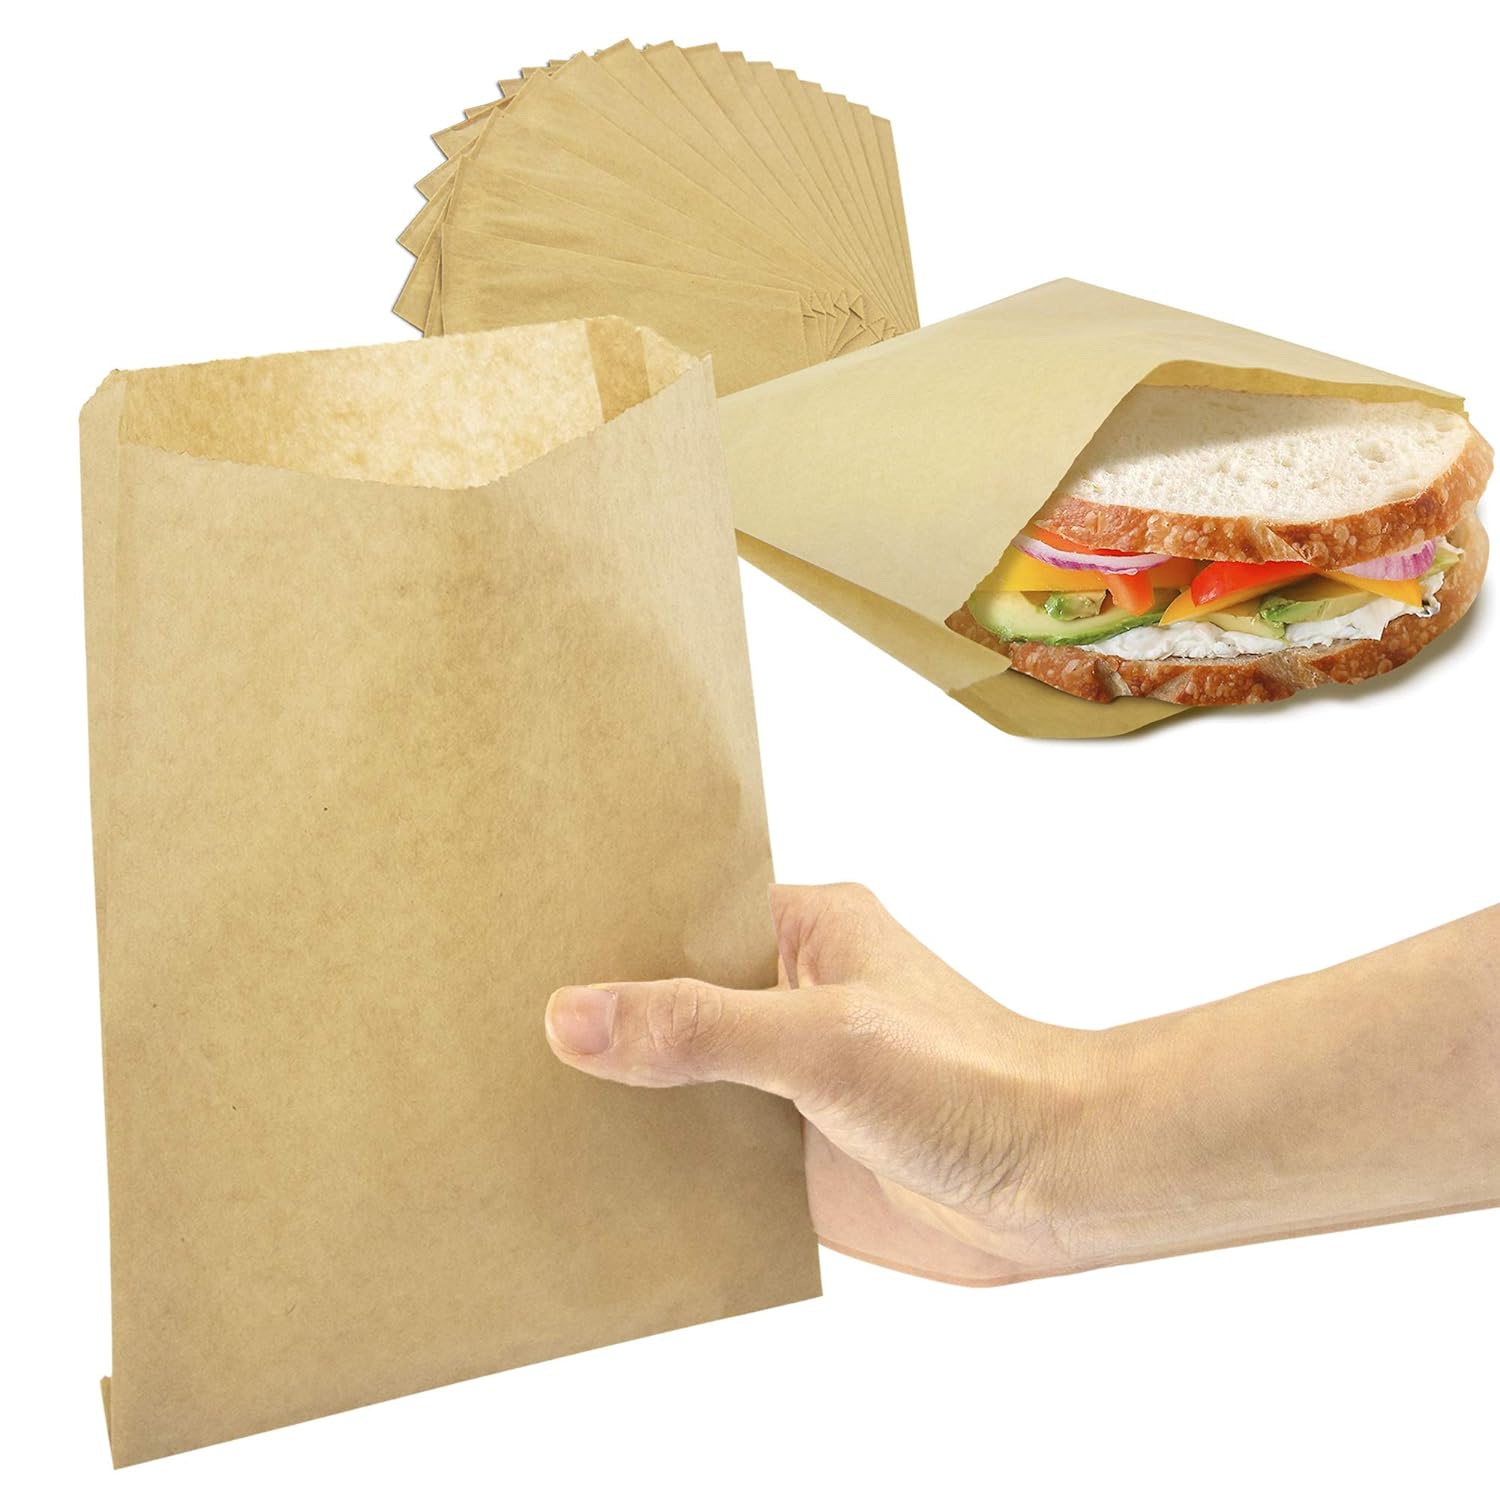 Fast food counter or takeout bags